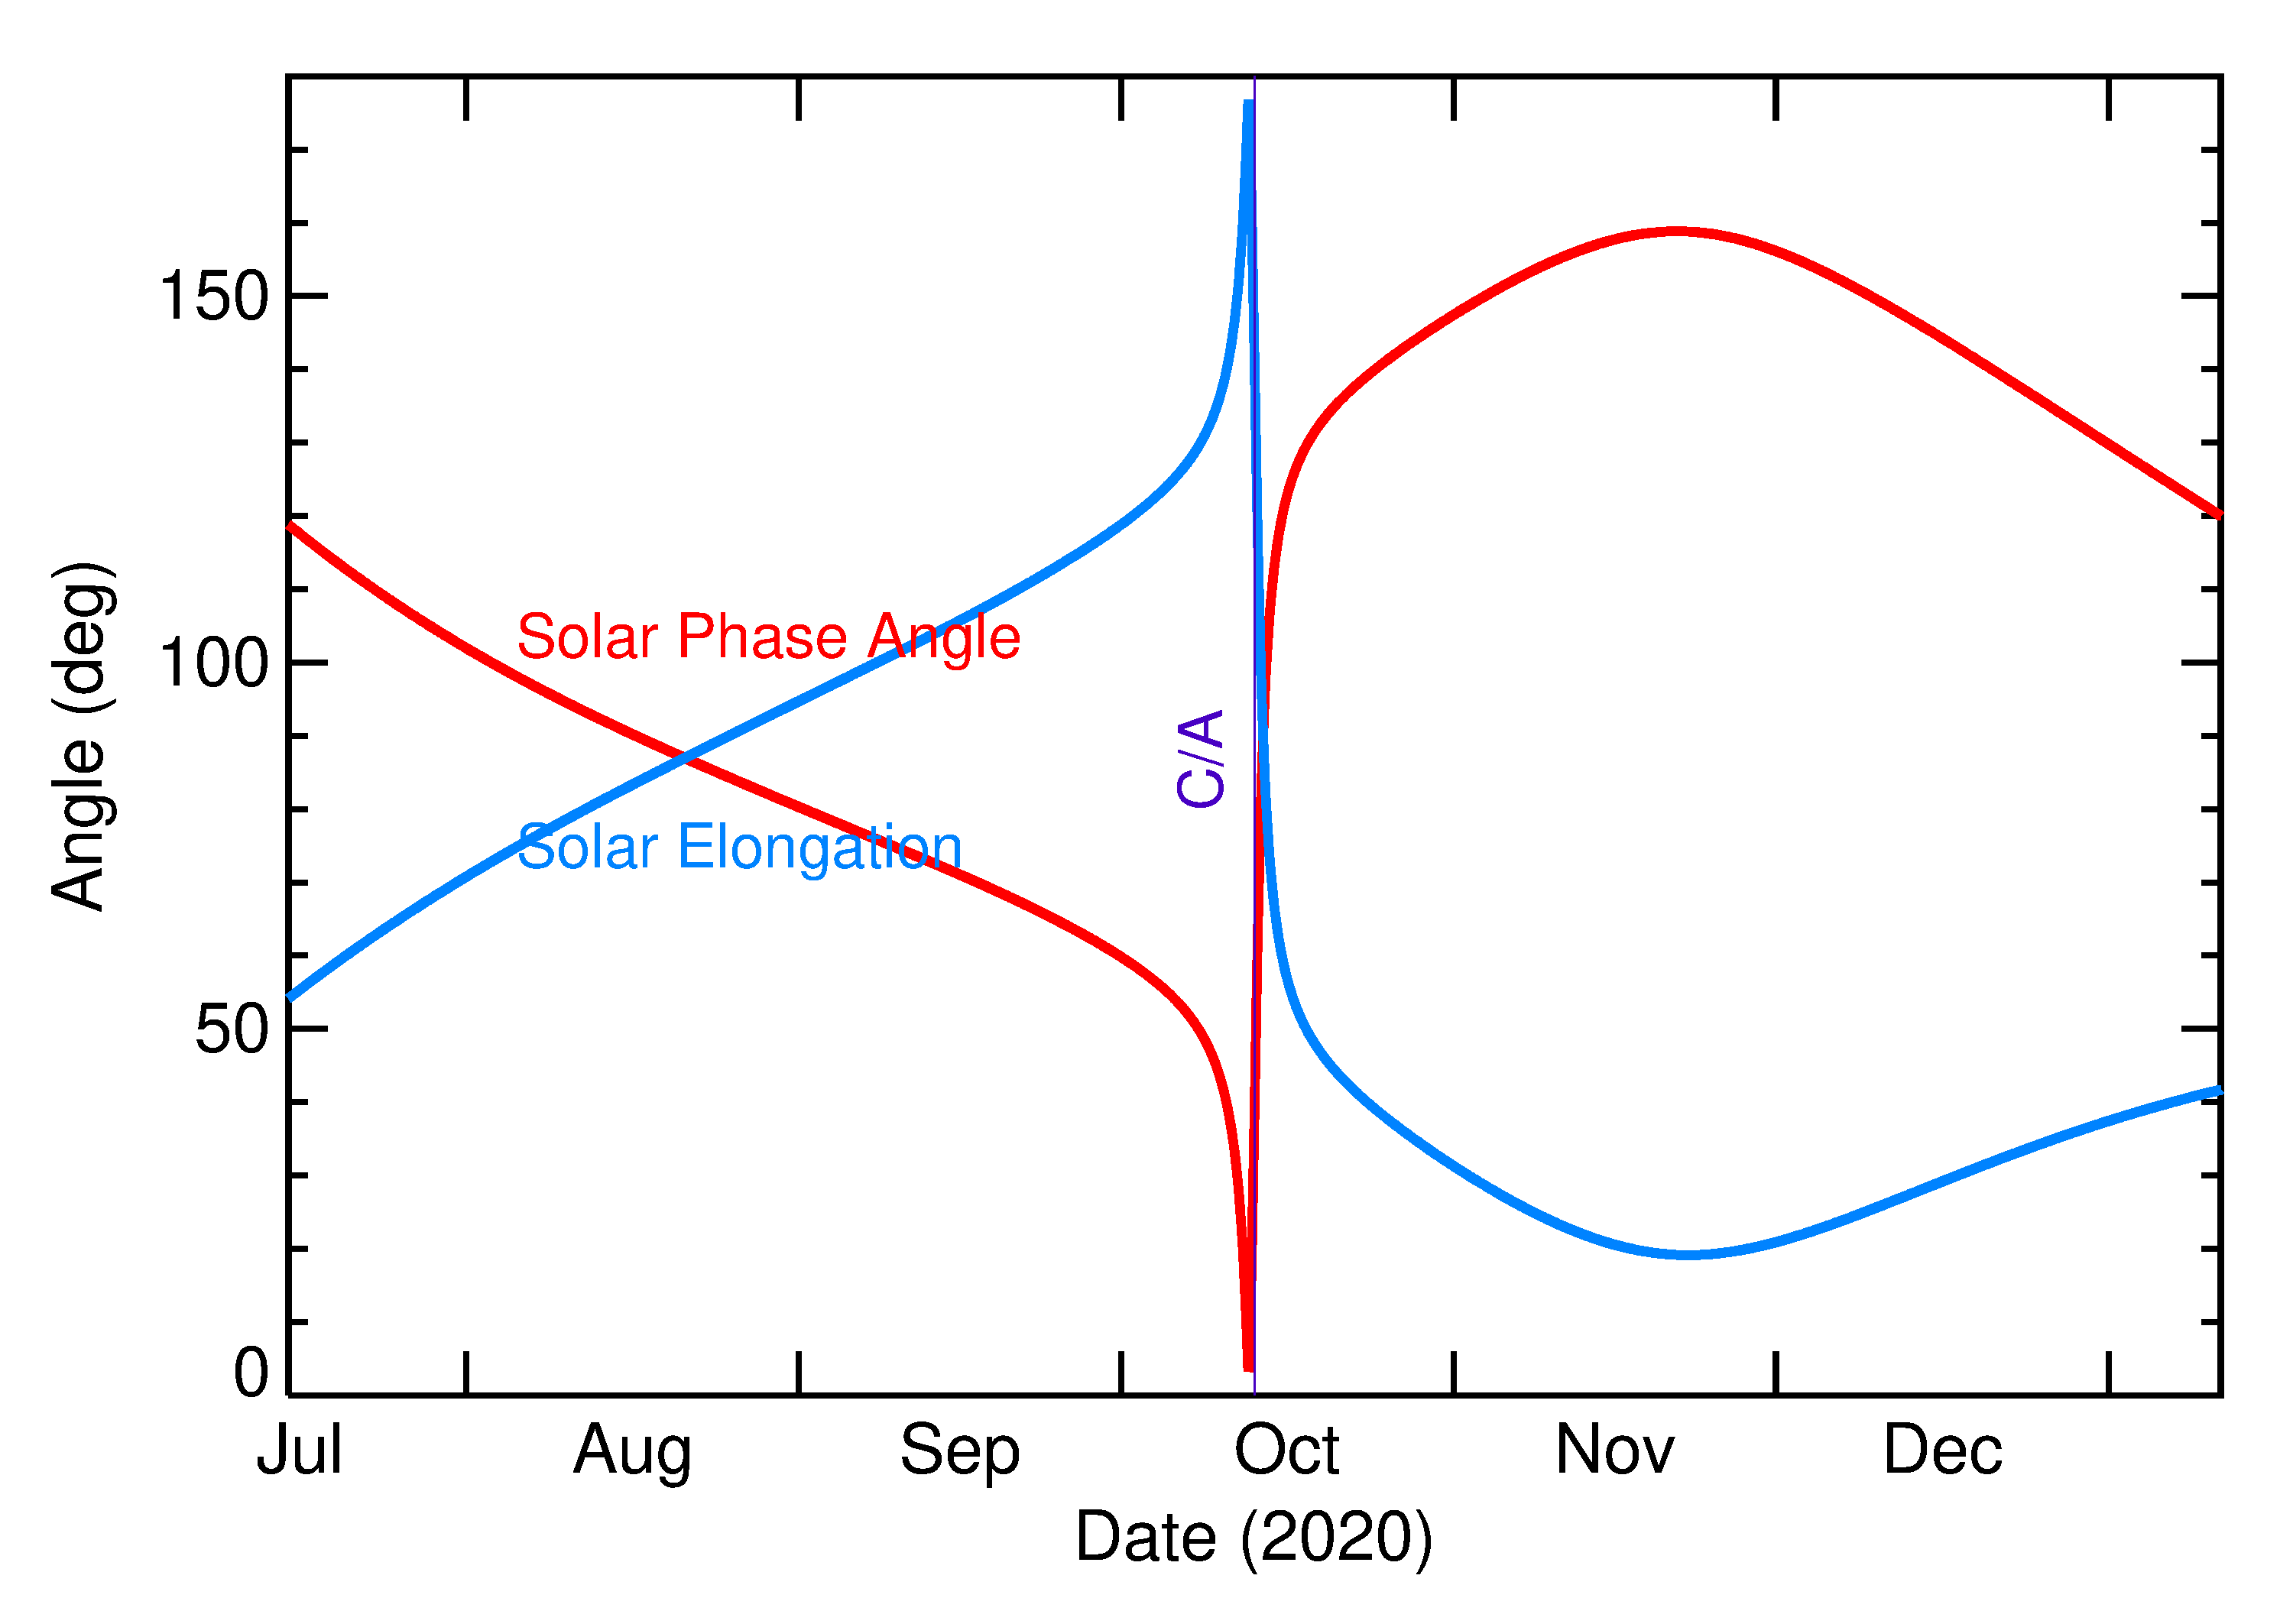 Solar Elongation and Solar Phase Angle of 2020 TS1 in the months around closest approach